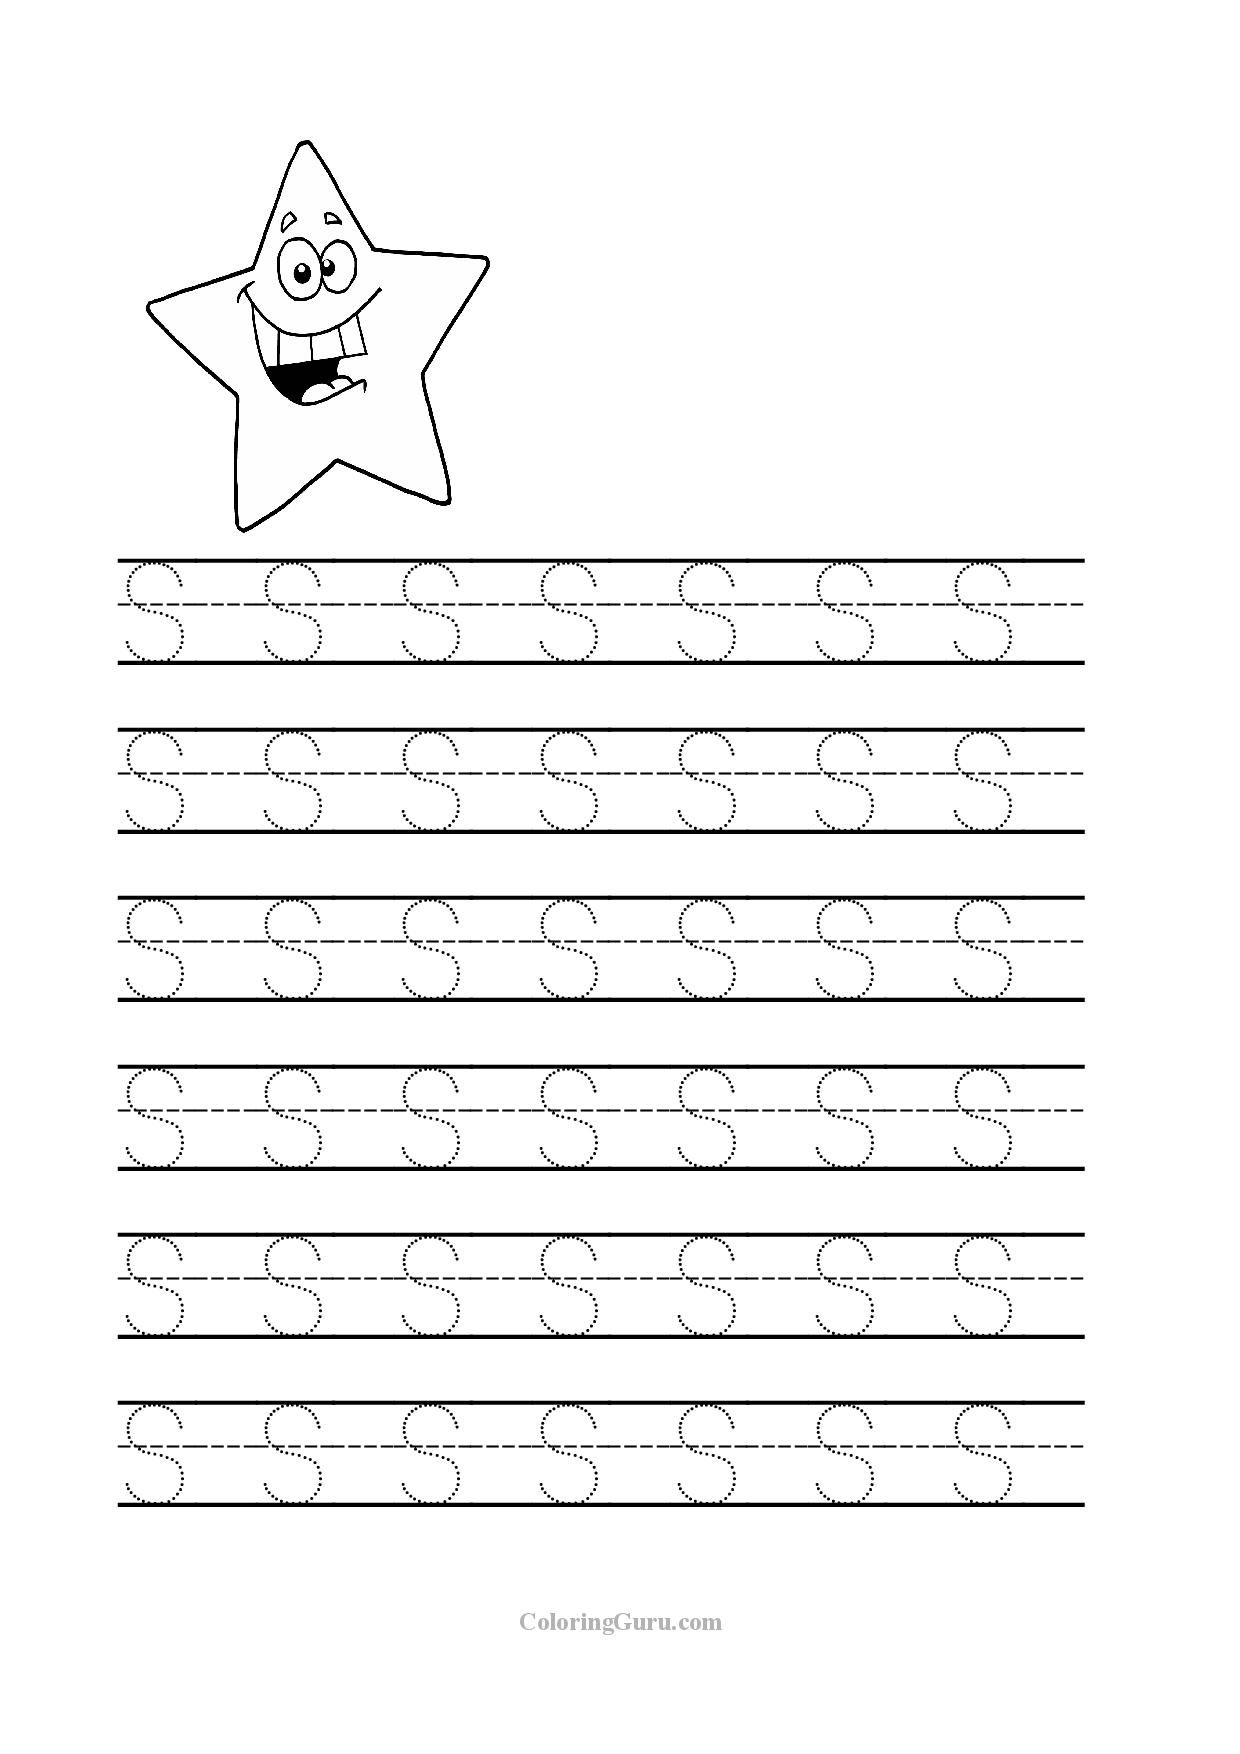 Free Printable Tracing Letter S Worksheets For Preschool in Tracing Writing Letters Worksheet